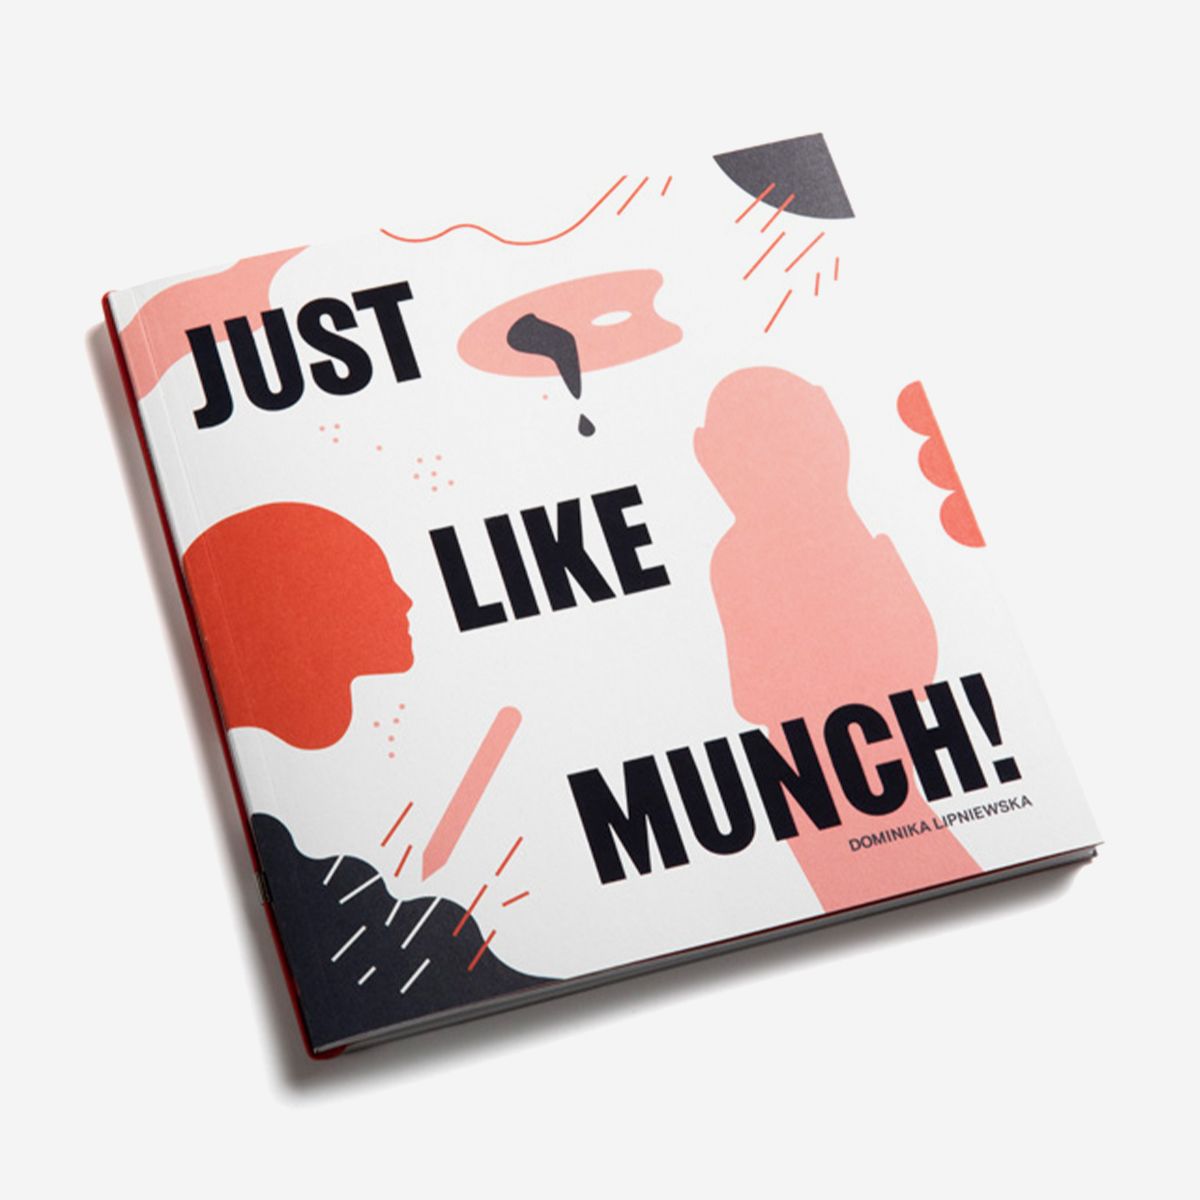 Just like Munch! Activity Booklet for kids